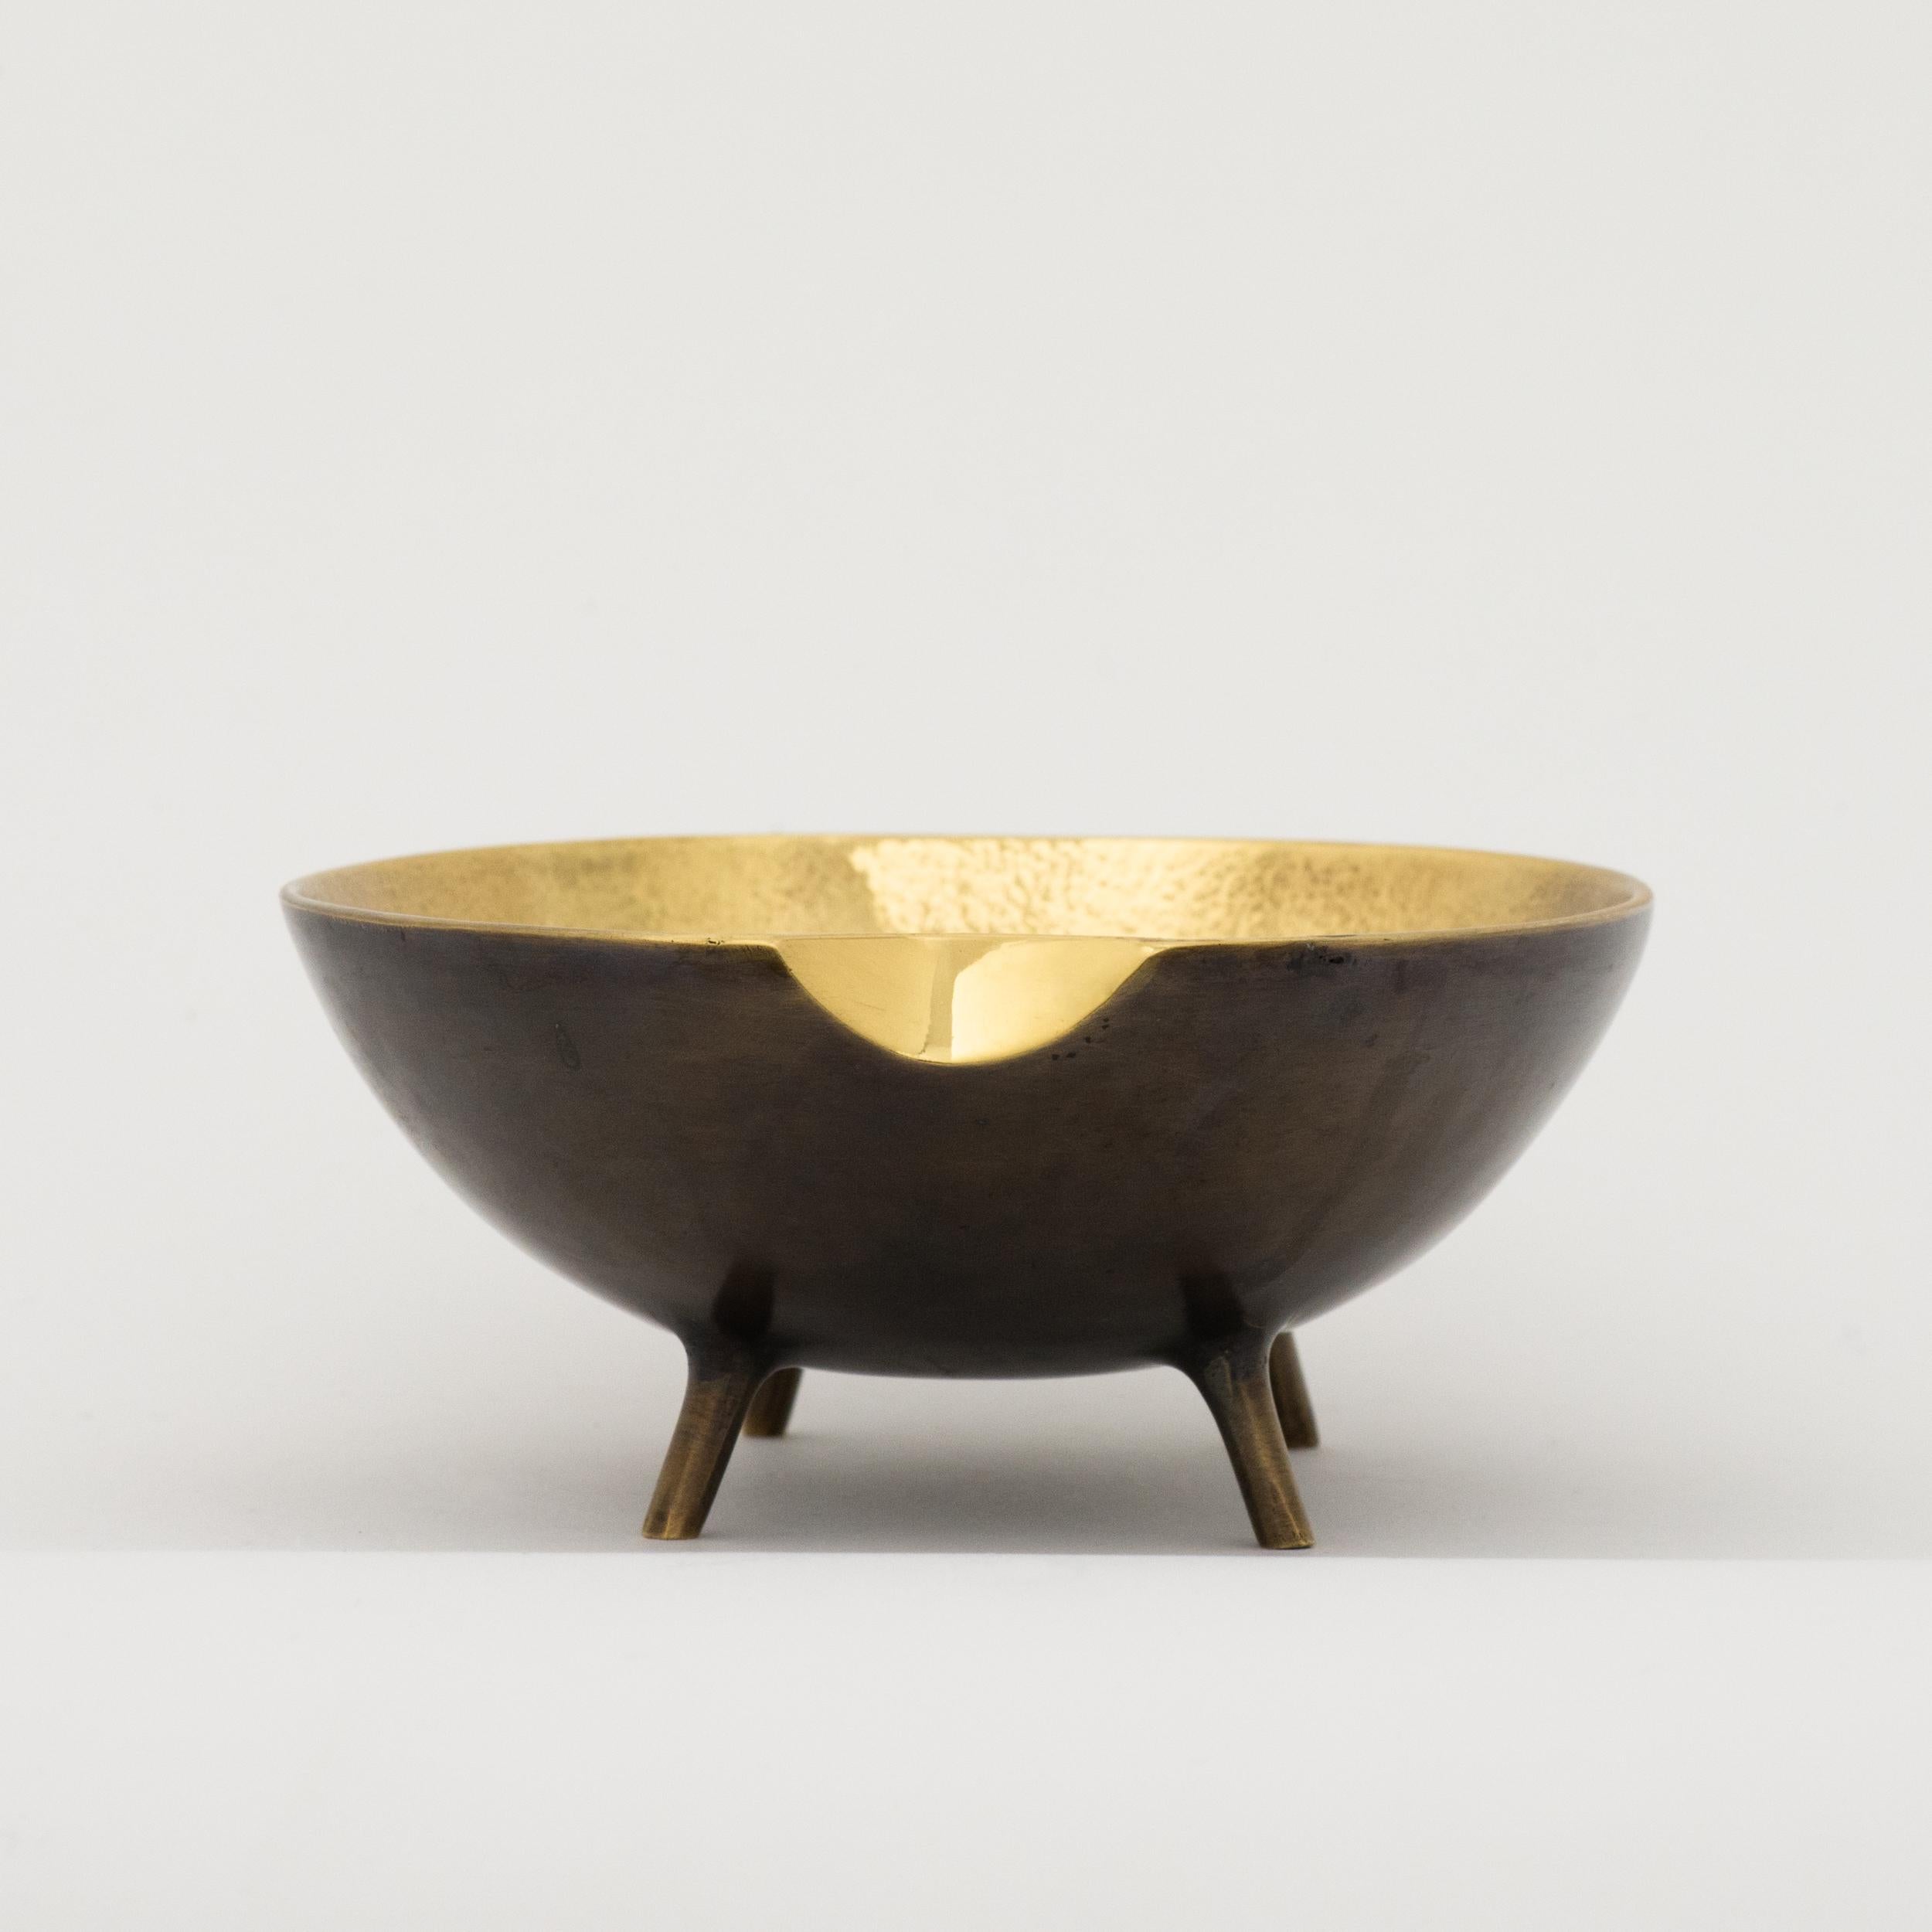 Patinated Cast Brass Decorative Bowl with Legs, Vide-poche, with Bronze Patina For Sale